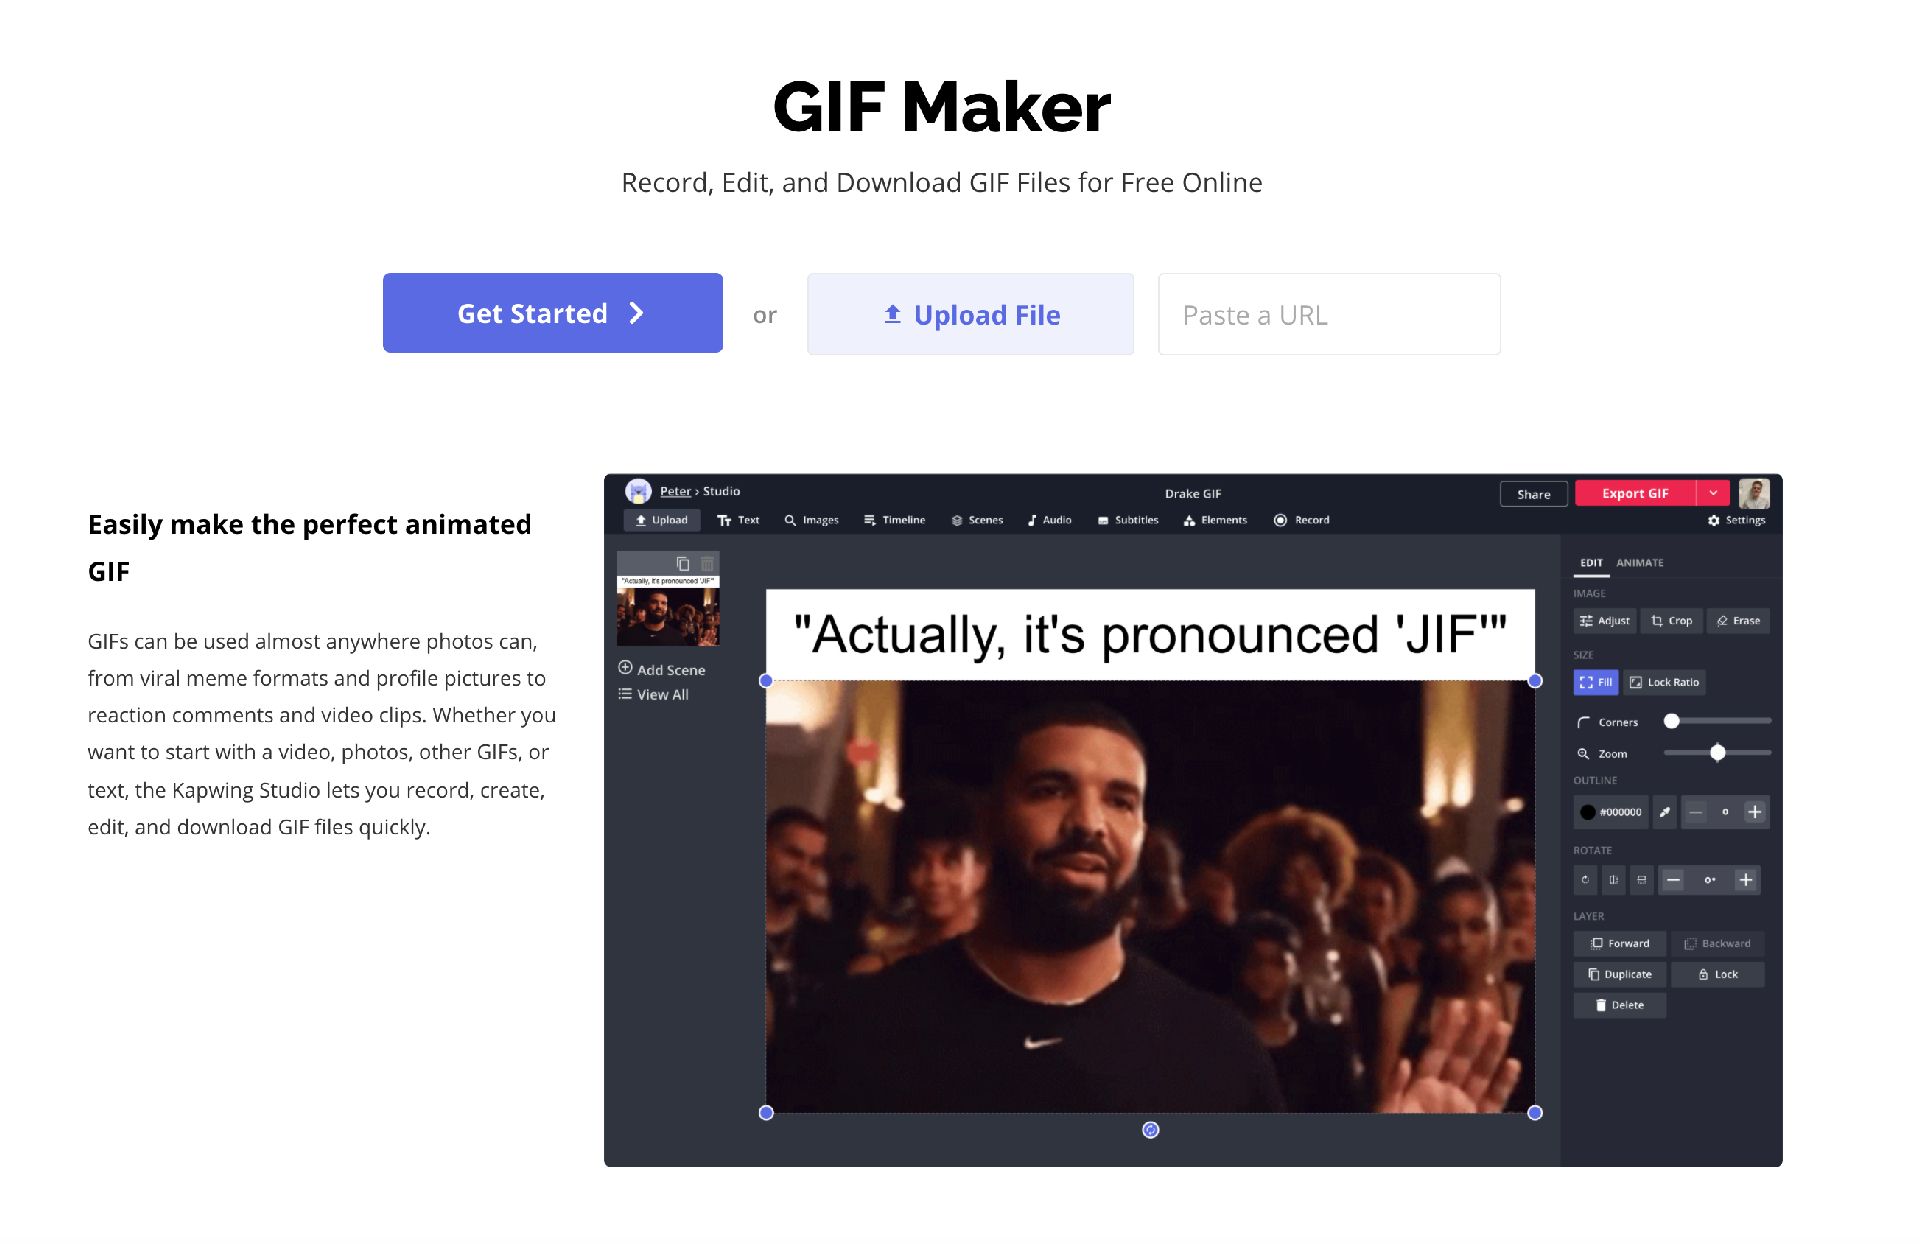 How to Make a GIF of Yourself